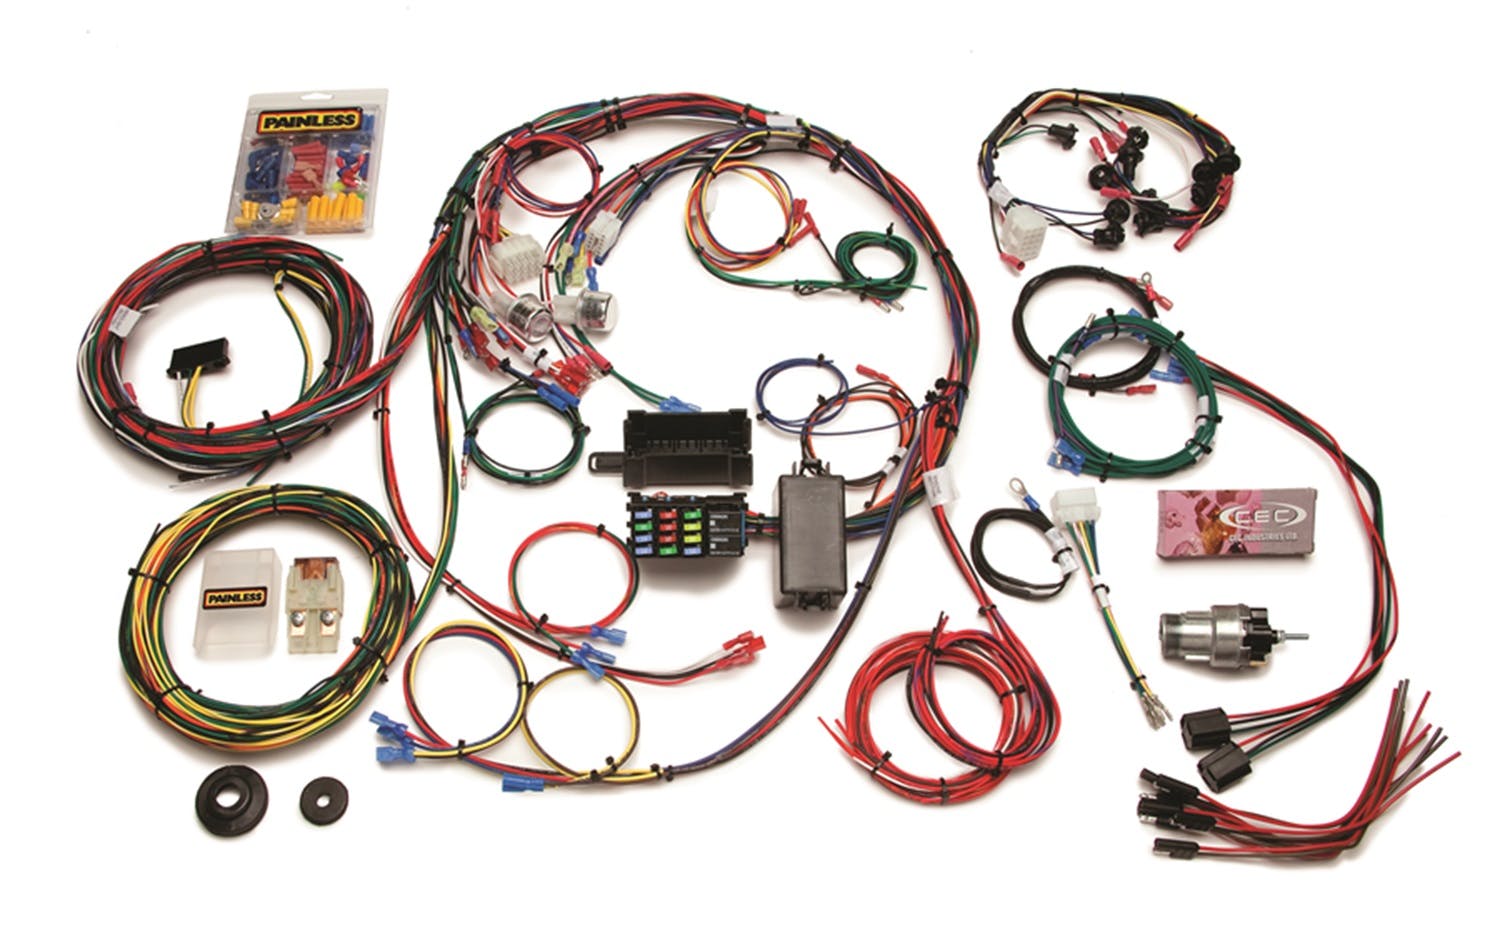 Painless 20121 21 Circuit Chassis Wiring Harness